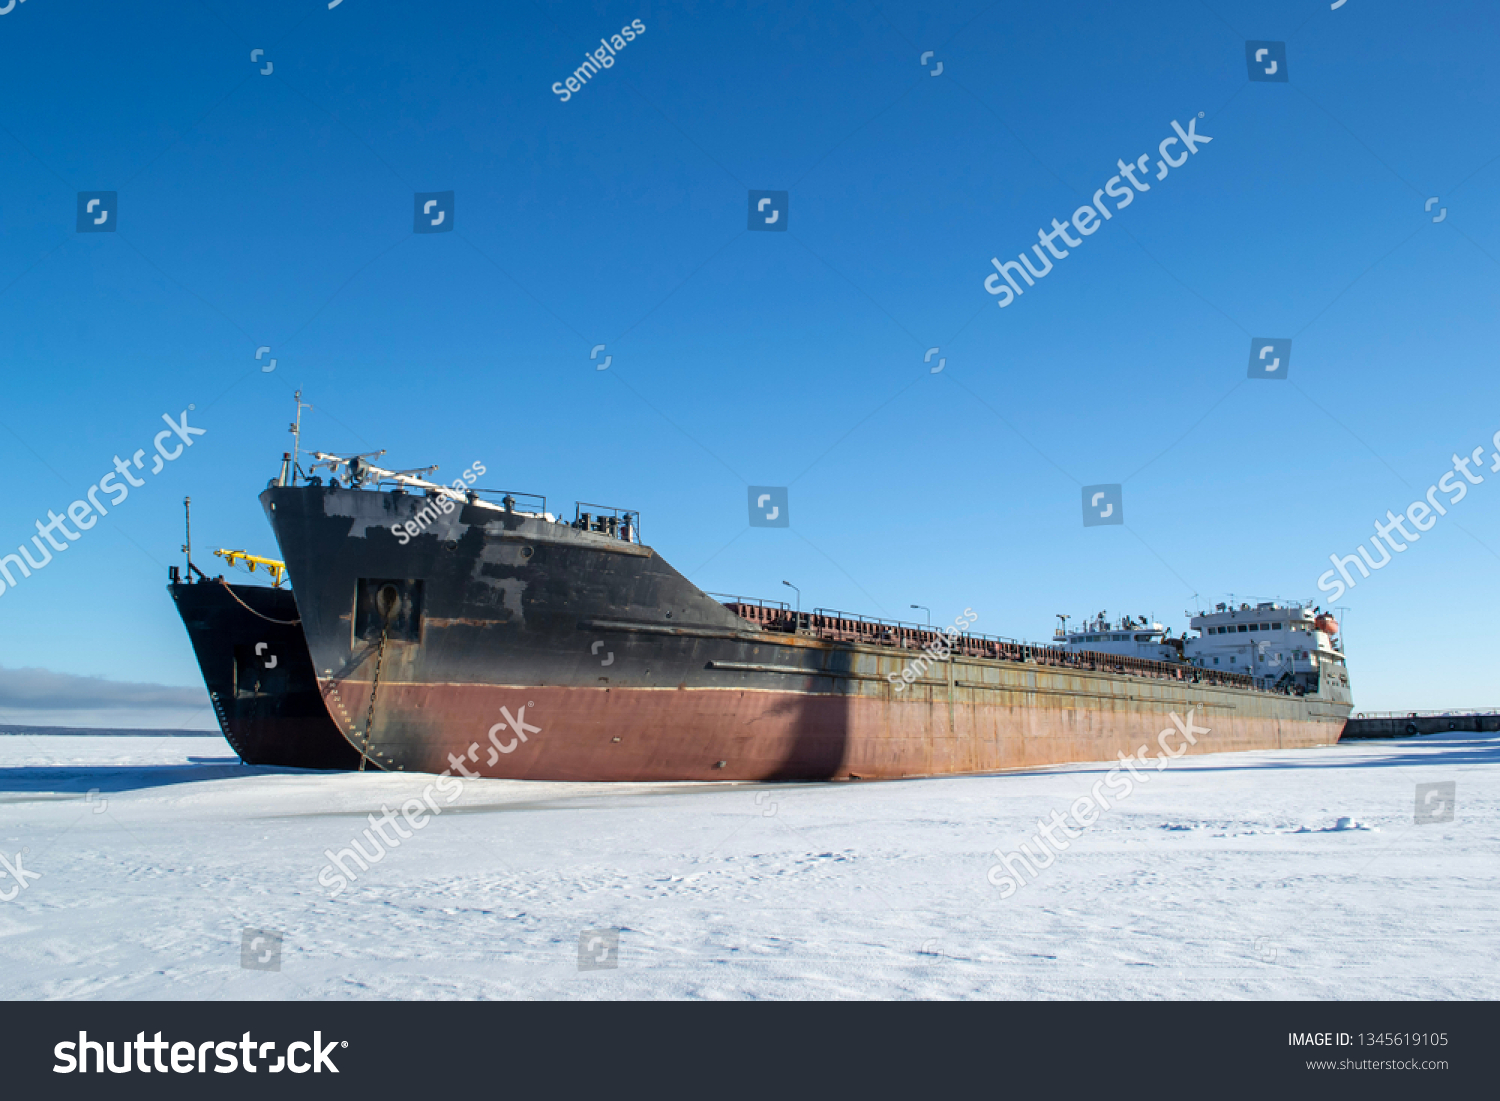 Cargo vessels at the port in the winter parking #1345619105